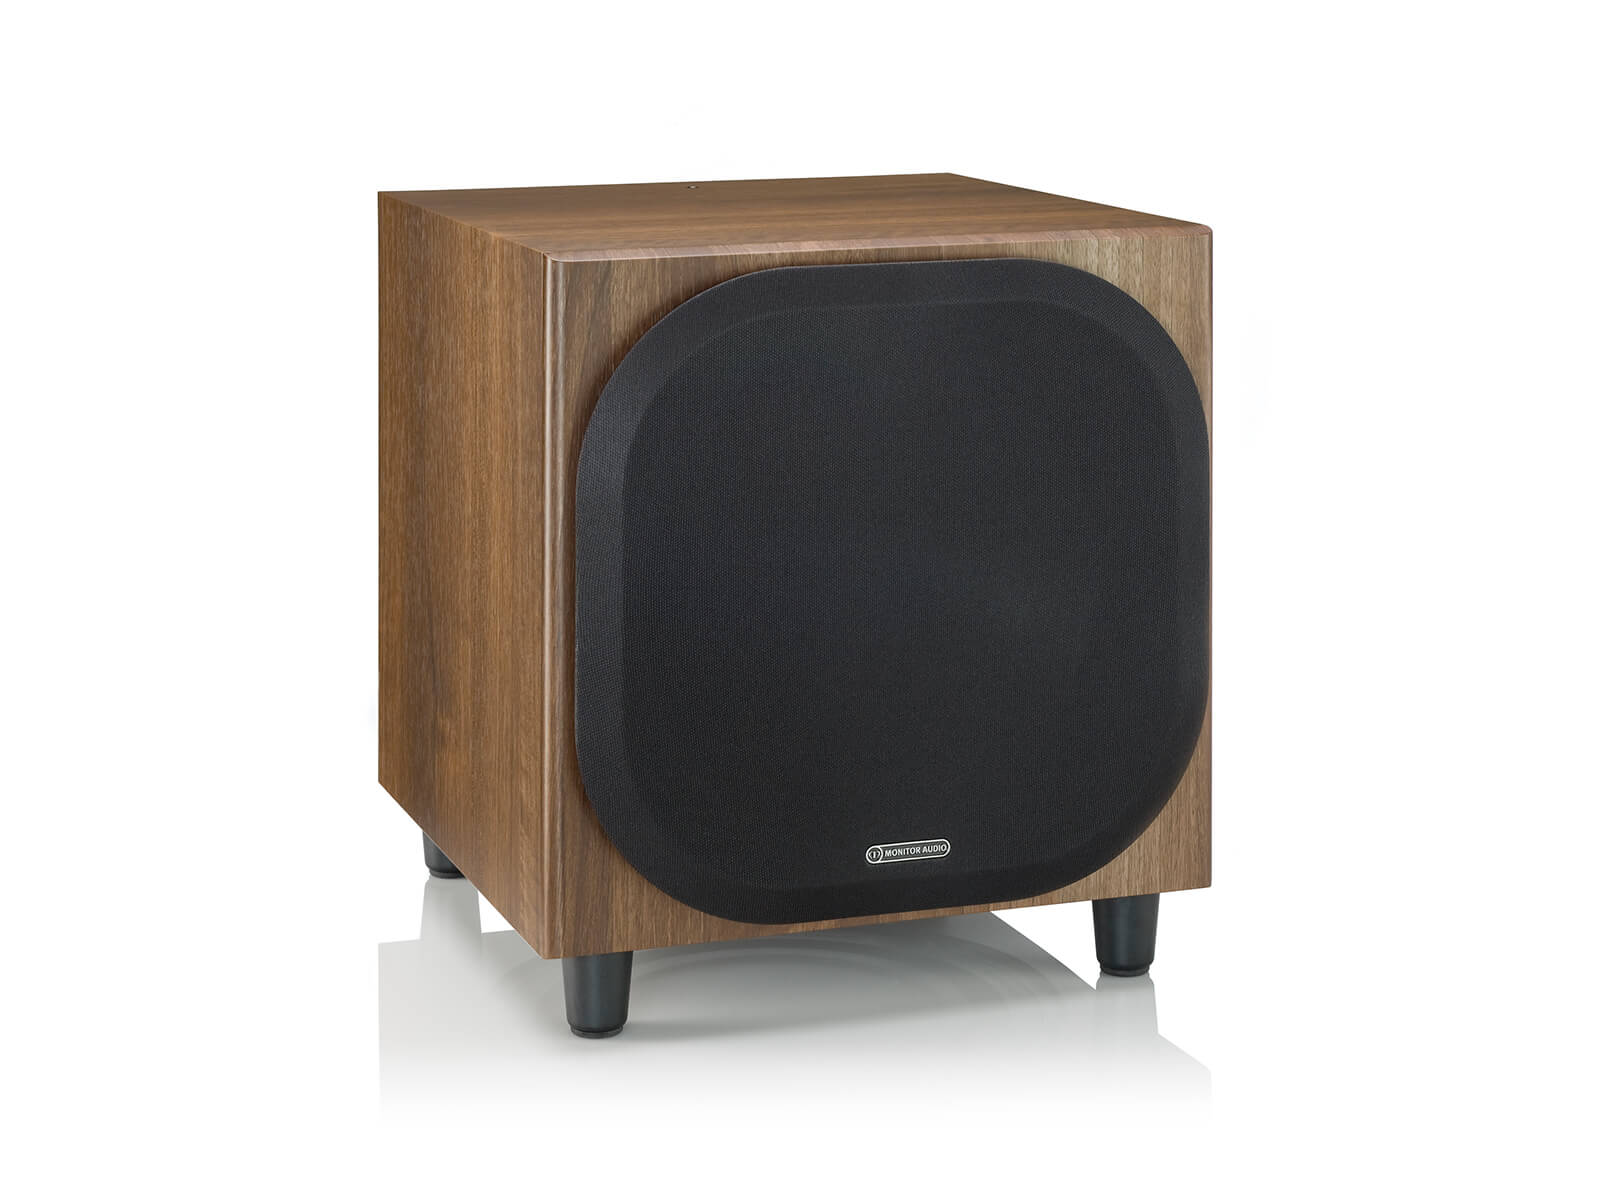 Bronze W10 subwoofer, featuring a grille and a walnut vinyl finish.